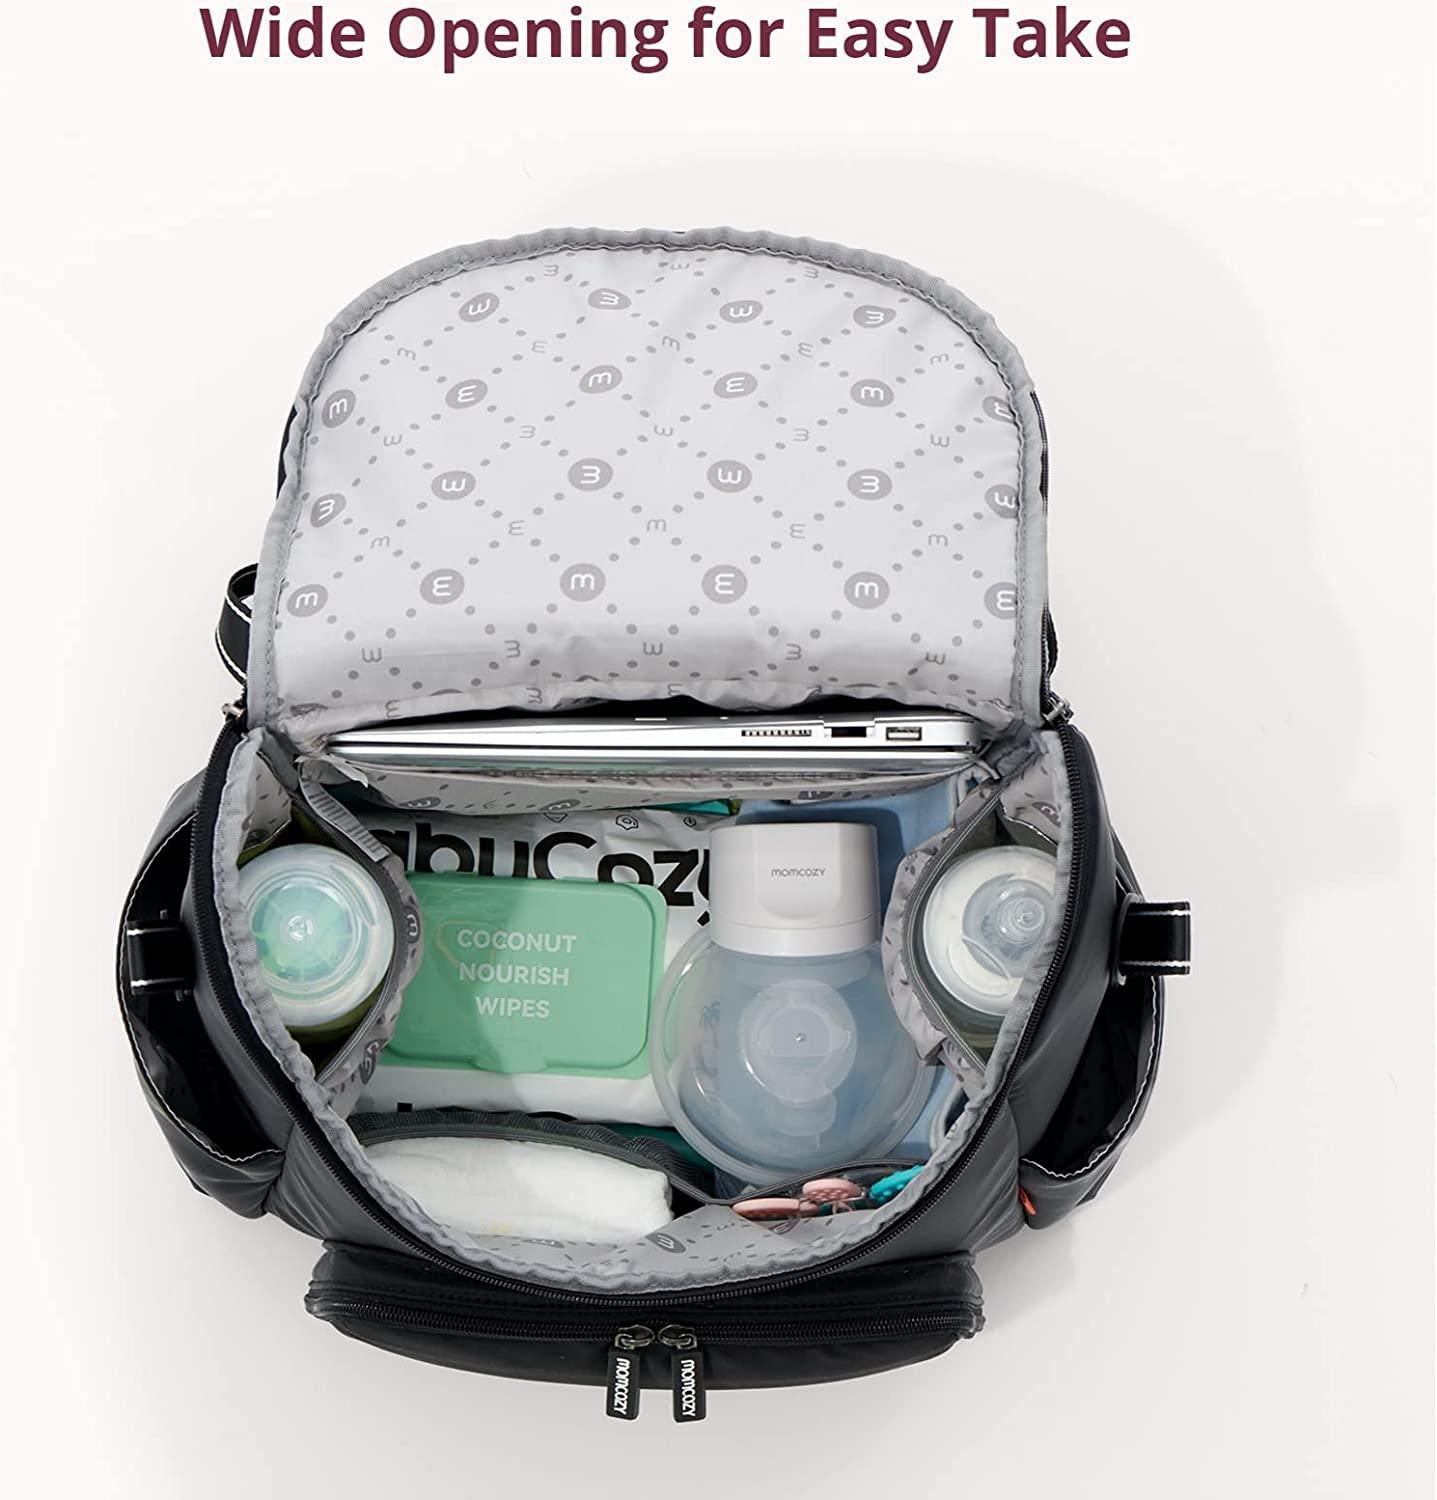 Large Capacity Momcozy Diaper Bag For Mom And Baby Care With Stroller  Organizer And Carriage T221026 From Babiq03, $40.96